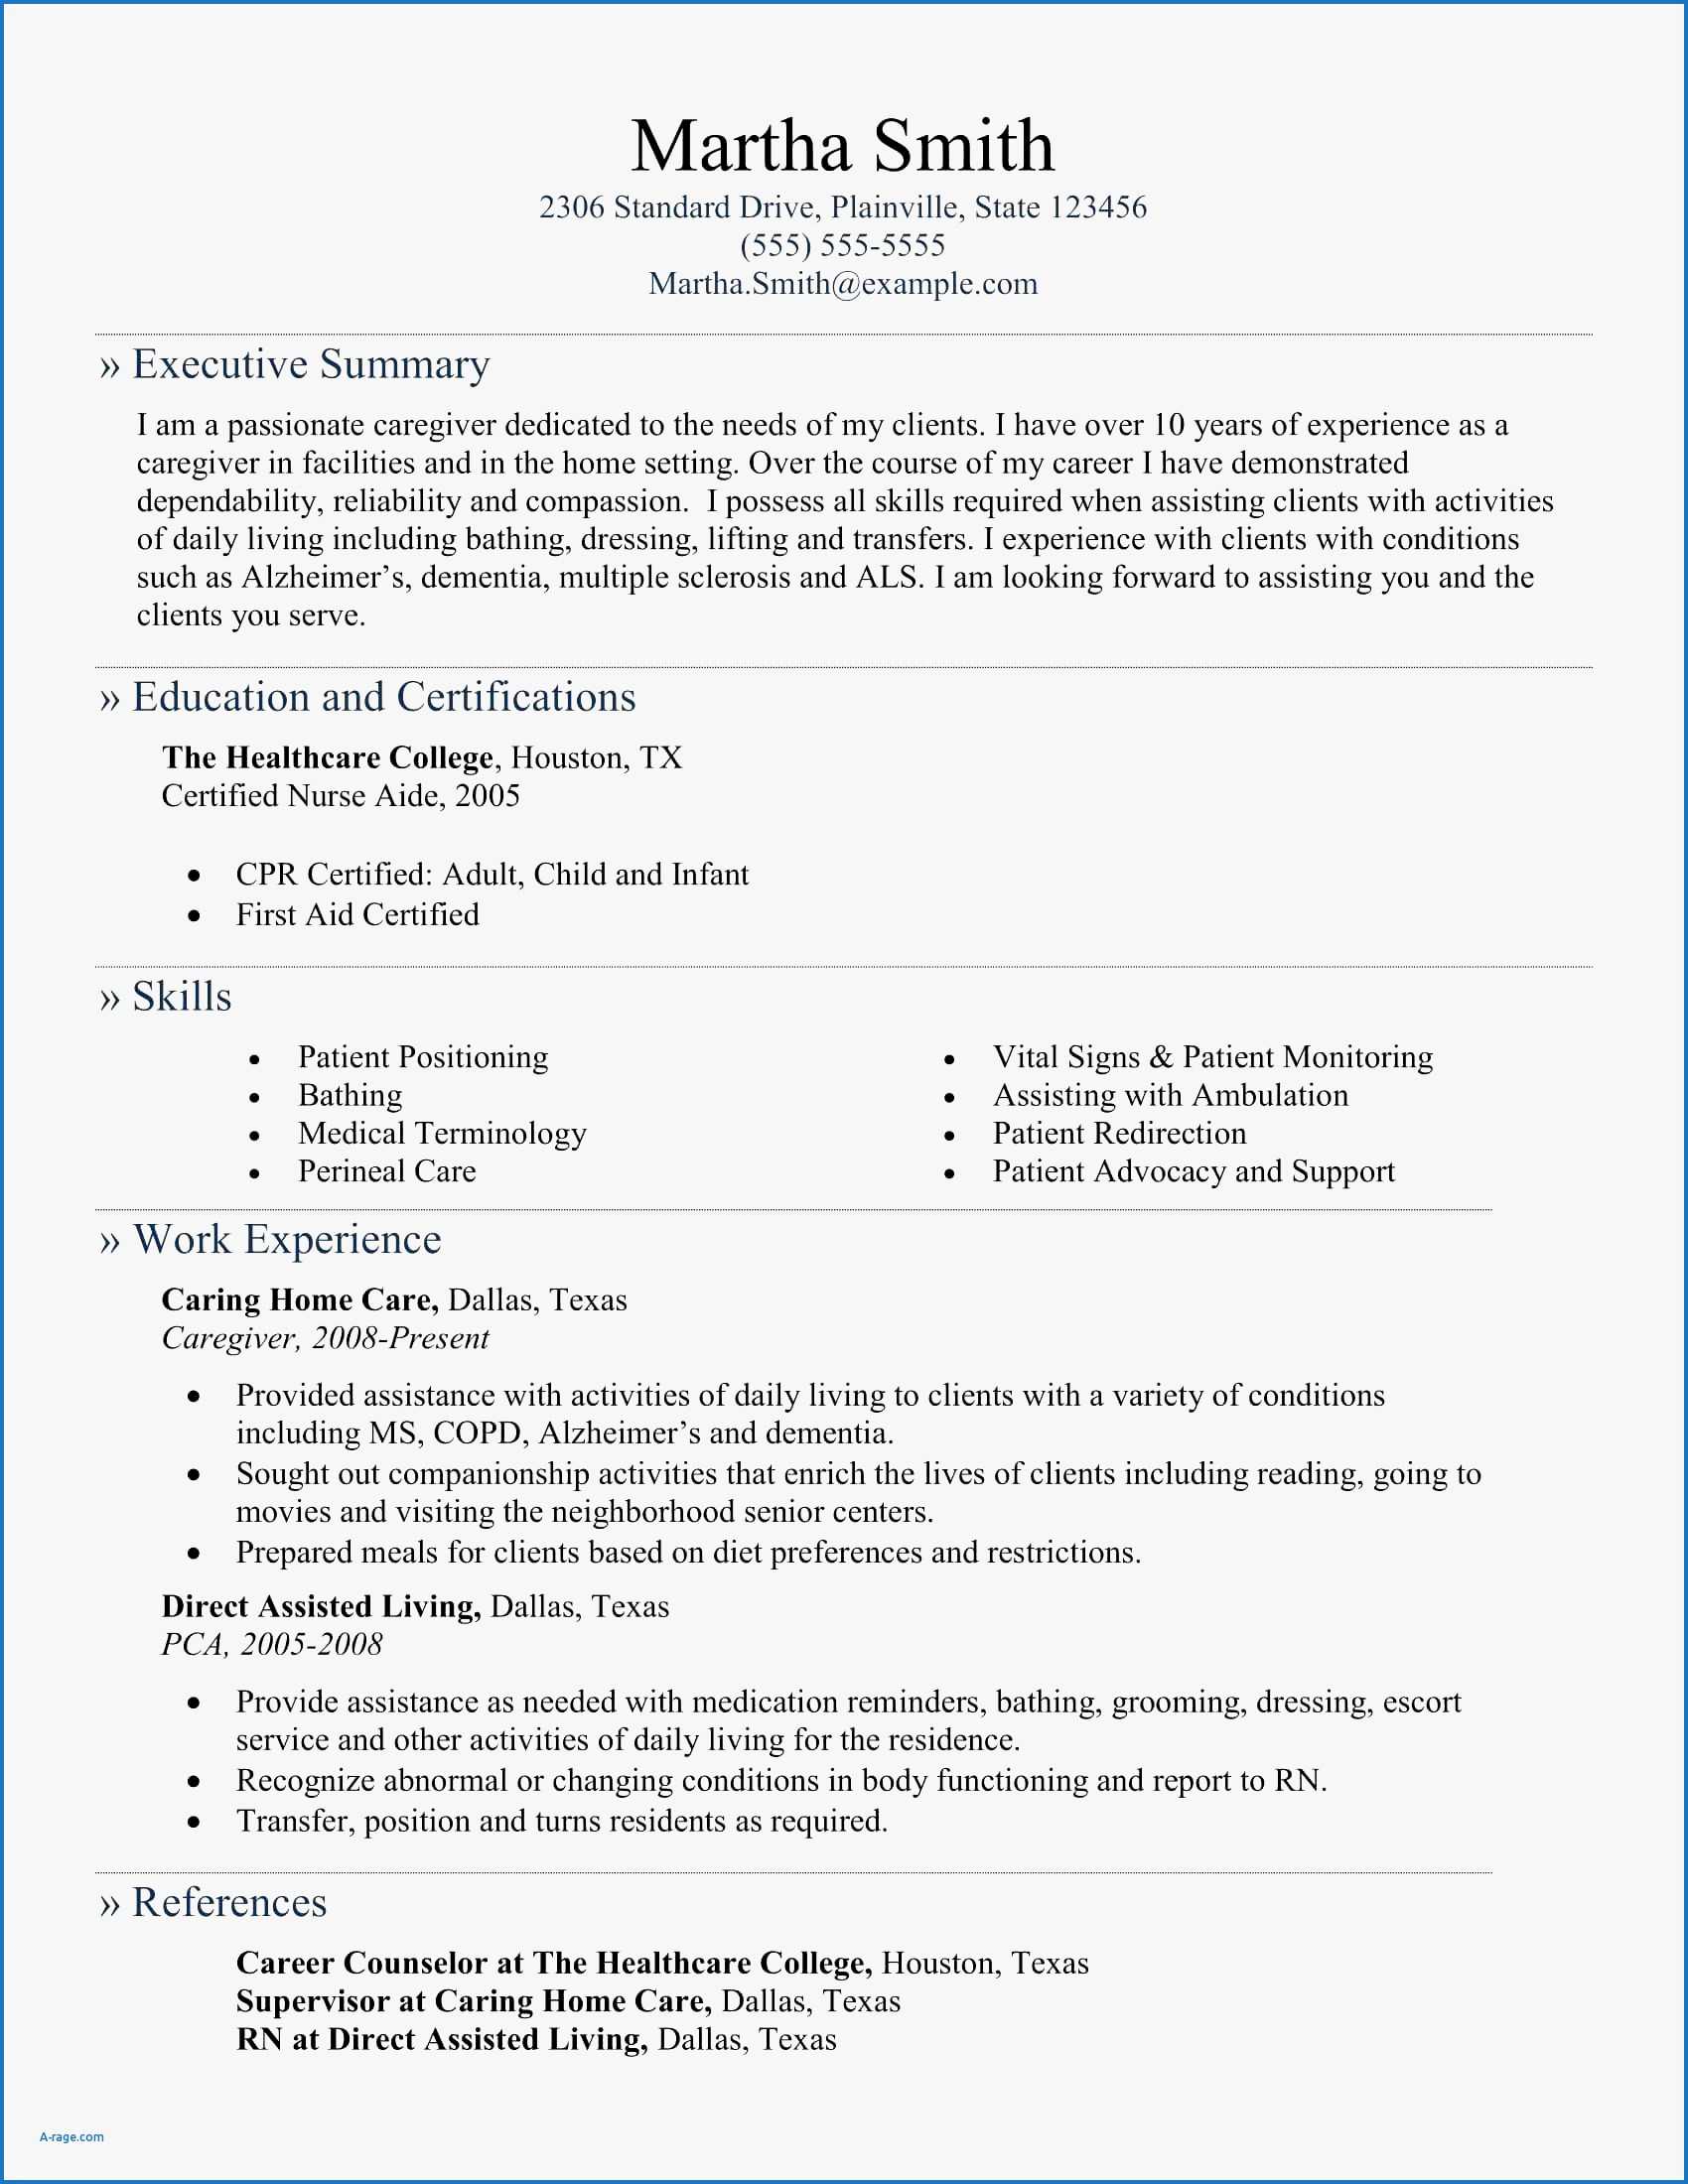 Nutritional Advisor Cover Letter New Clinical Counselor With Community Service Template Word